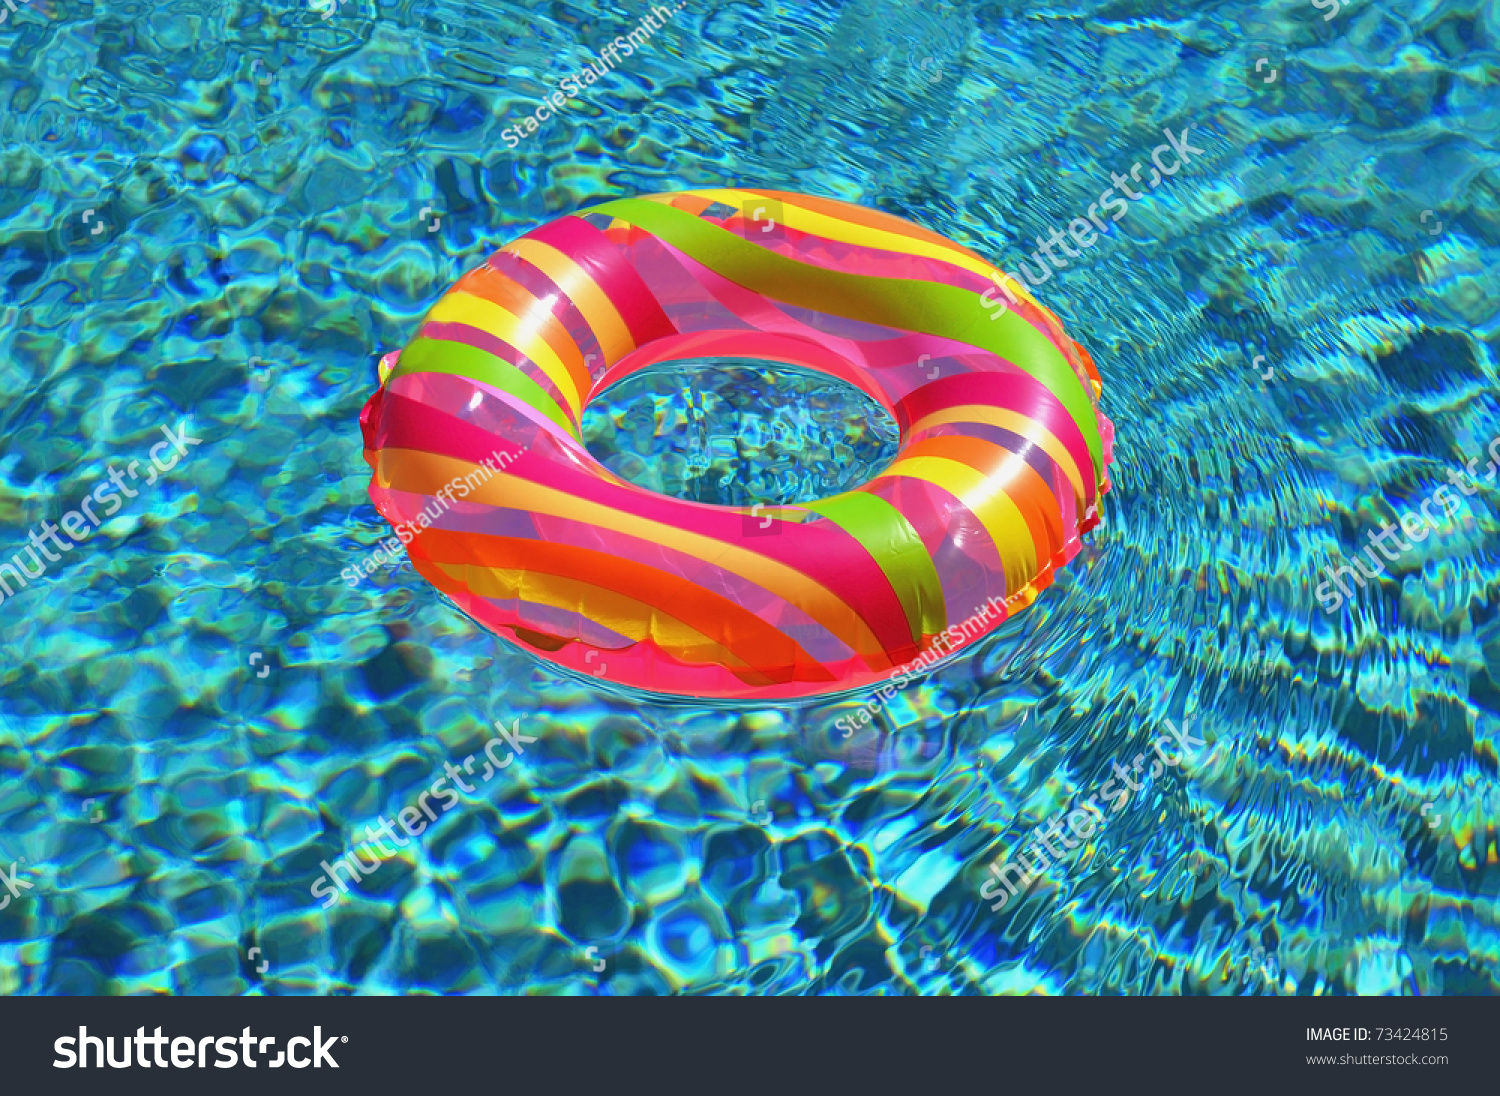 Pool Ring / Float In Swimming Pool Stock Photo 73424815 : Shutterstock